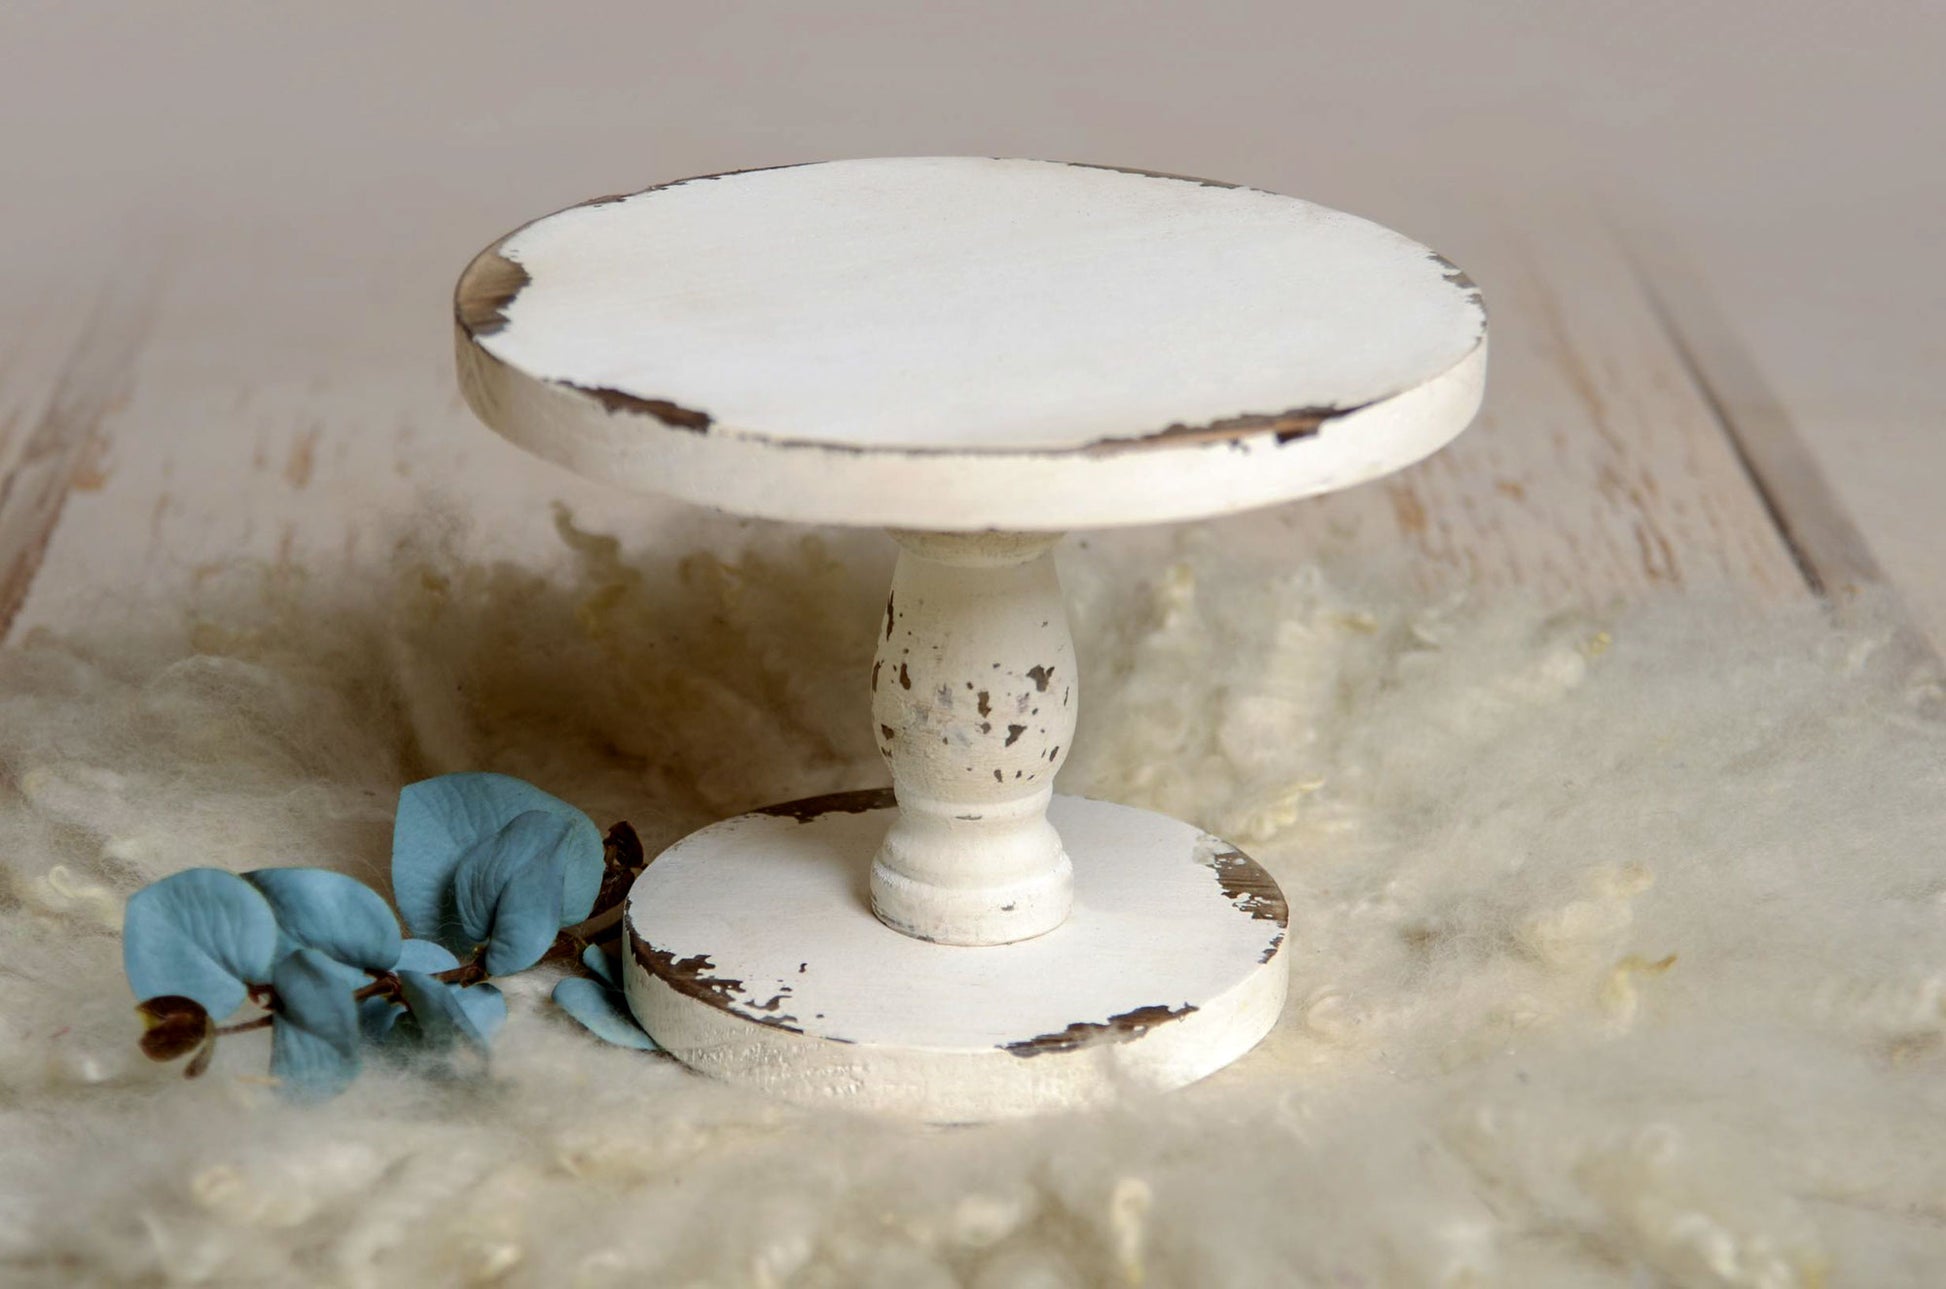 Wooden Rustic Cake Stand for Newborn Photography